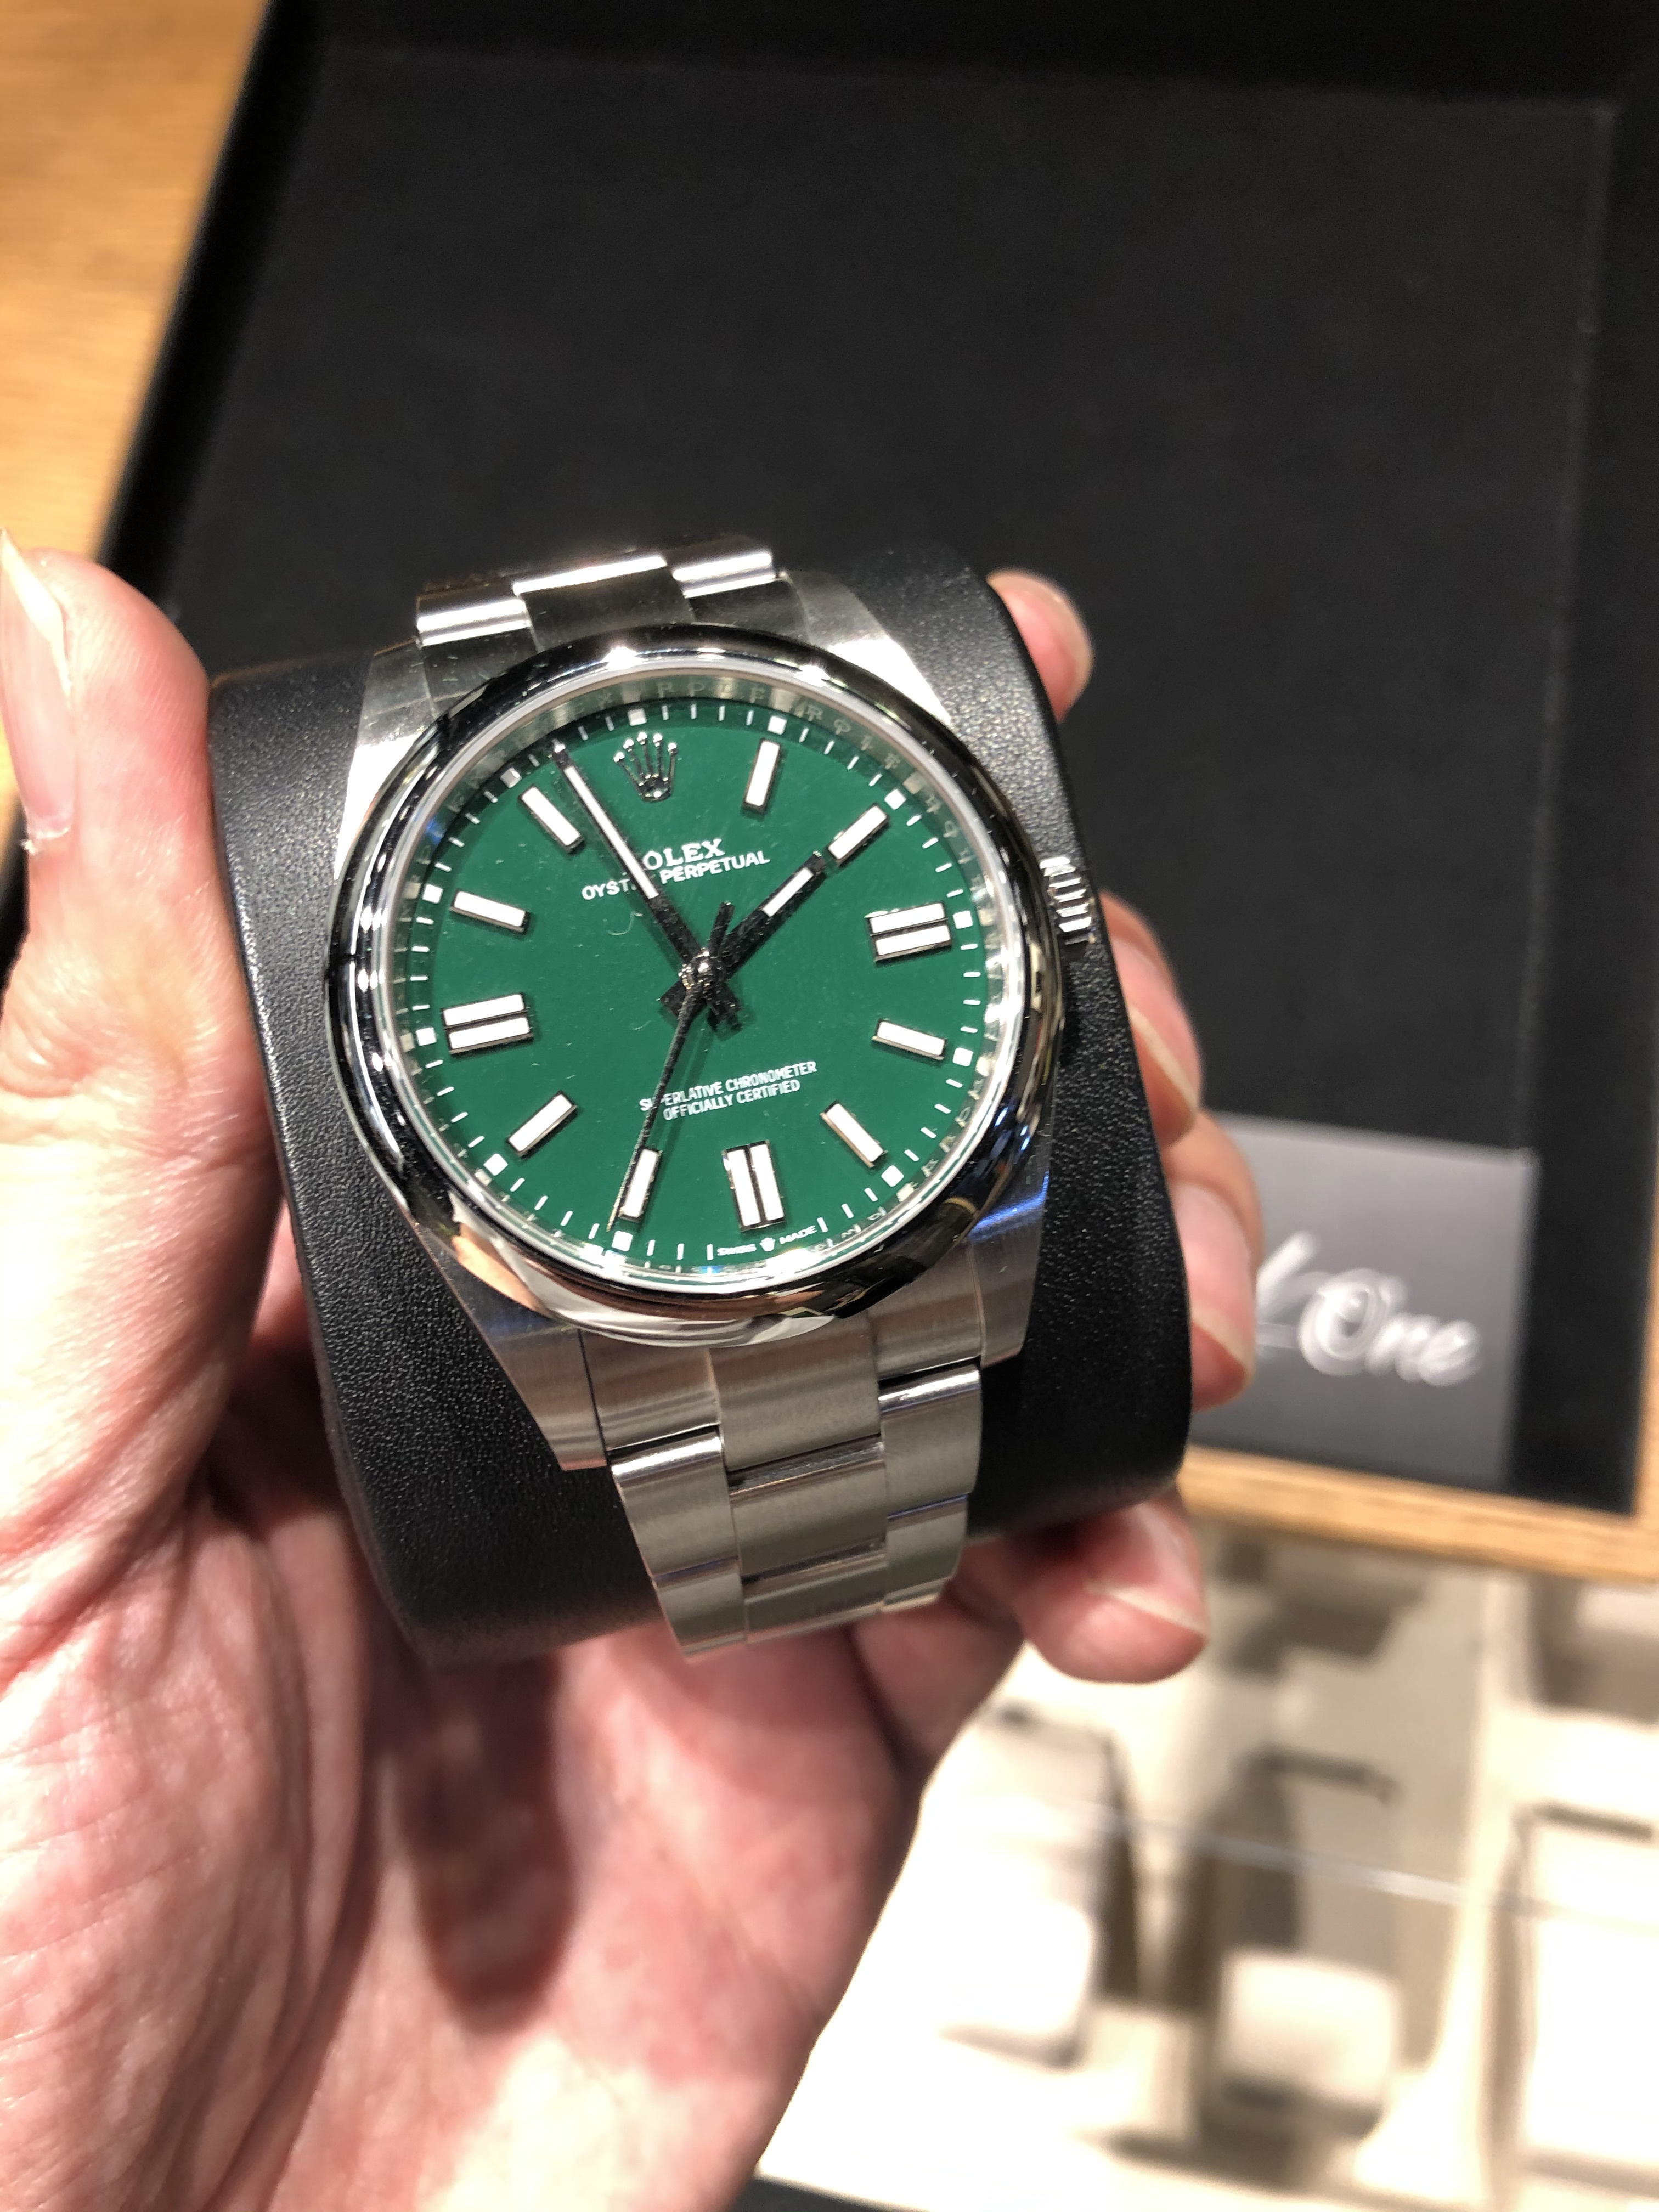 4K] Rolex Oyster Perpetual 41 GREEN Dial Review, Wrist shots and Macro  analysis